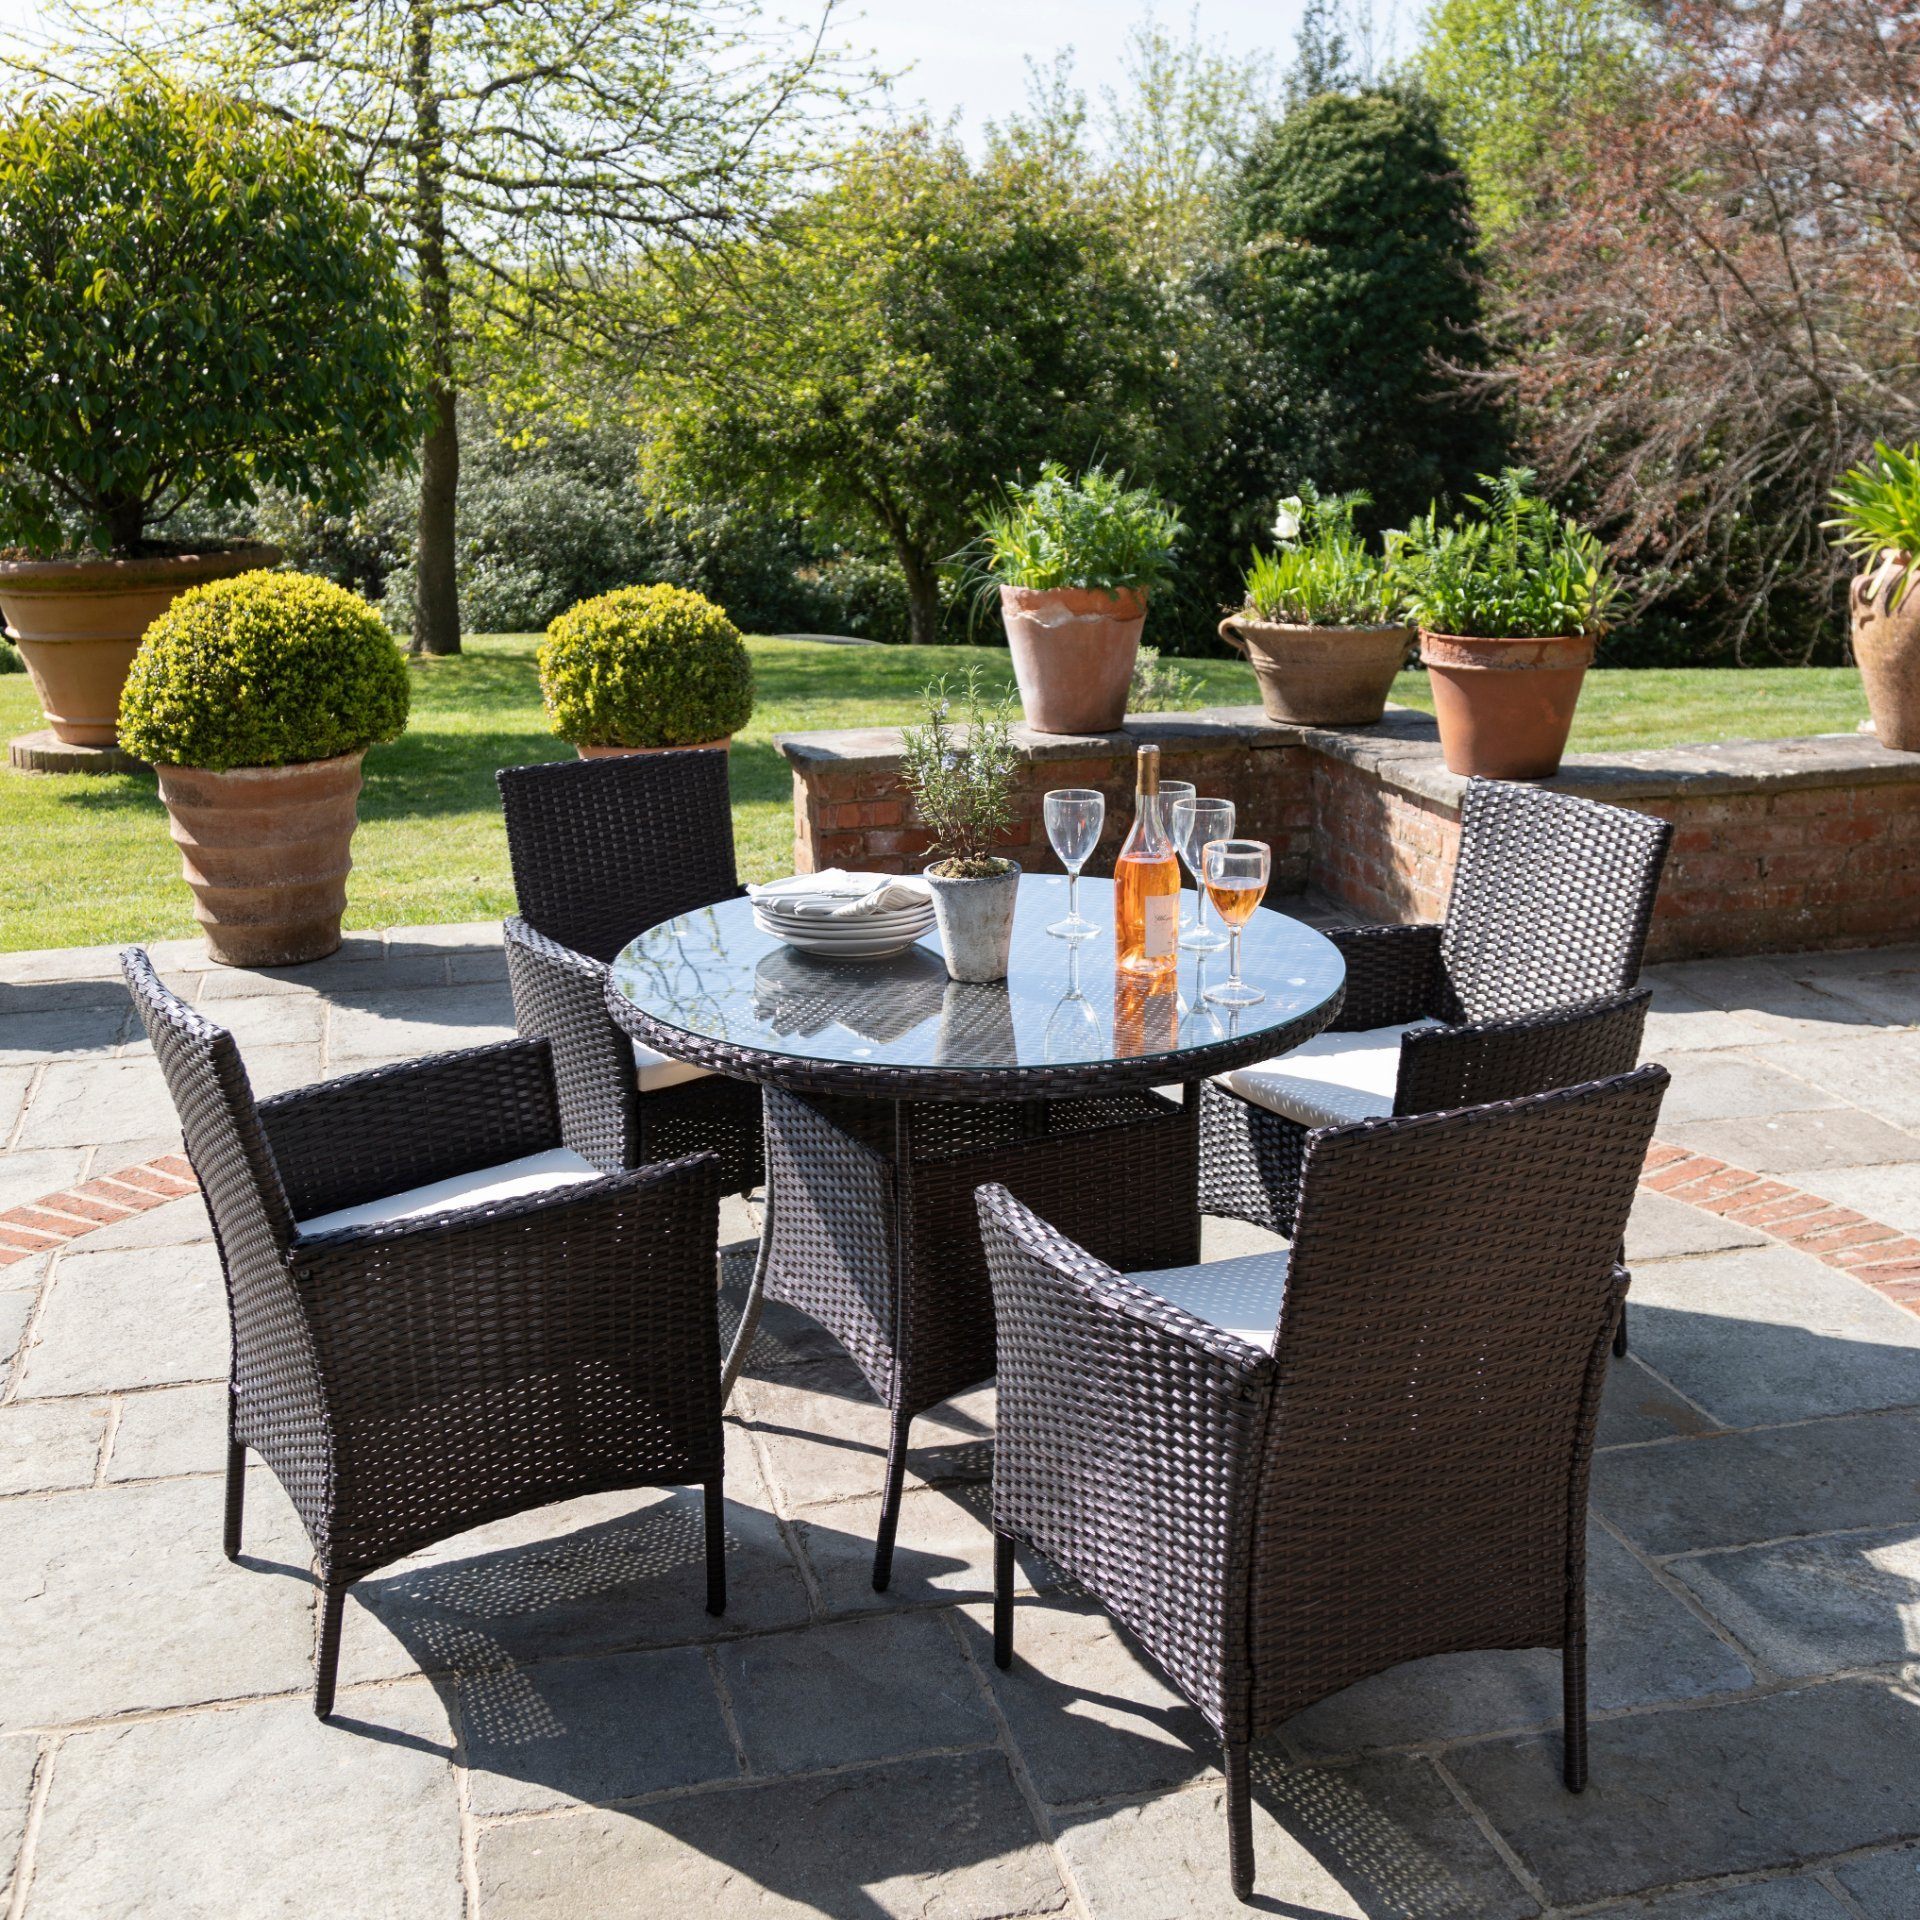 4 Seater Rattan Round Dining Set with Parasol - Rattan Garden Furniture - Brown - In Stock Date - 30th June 2020 - Laura James